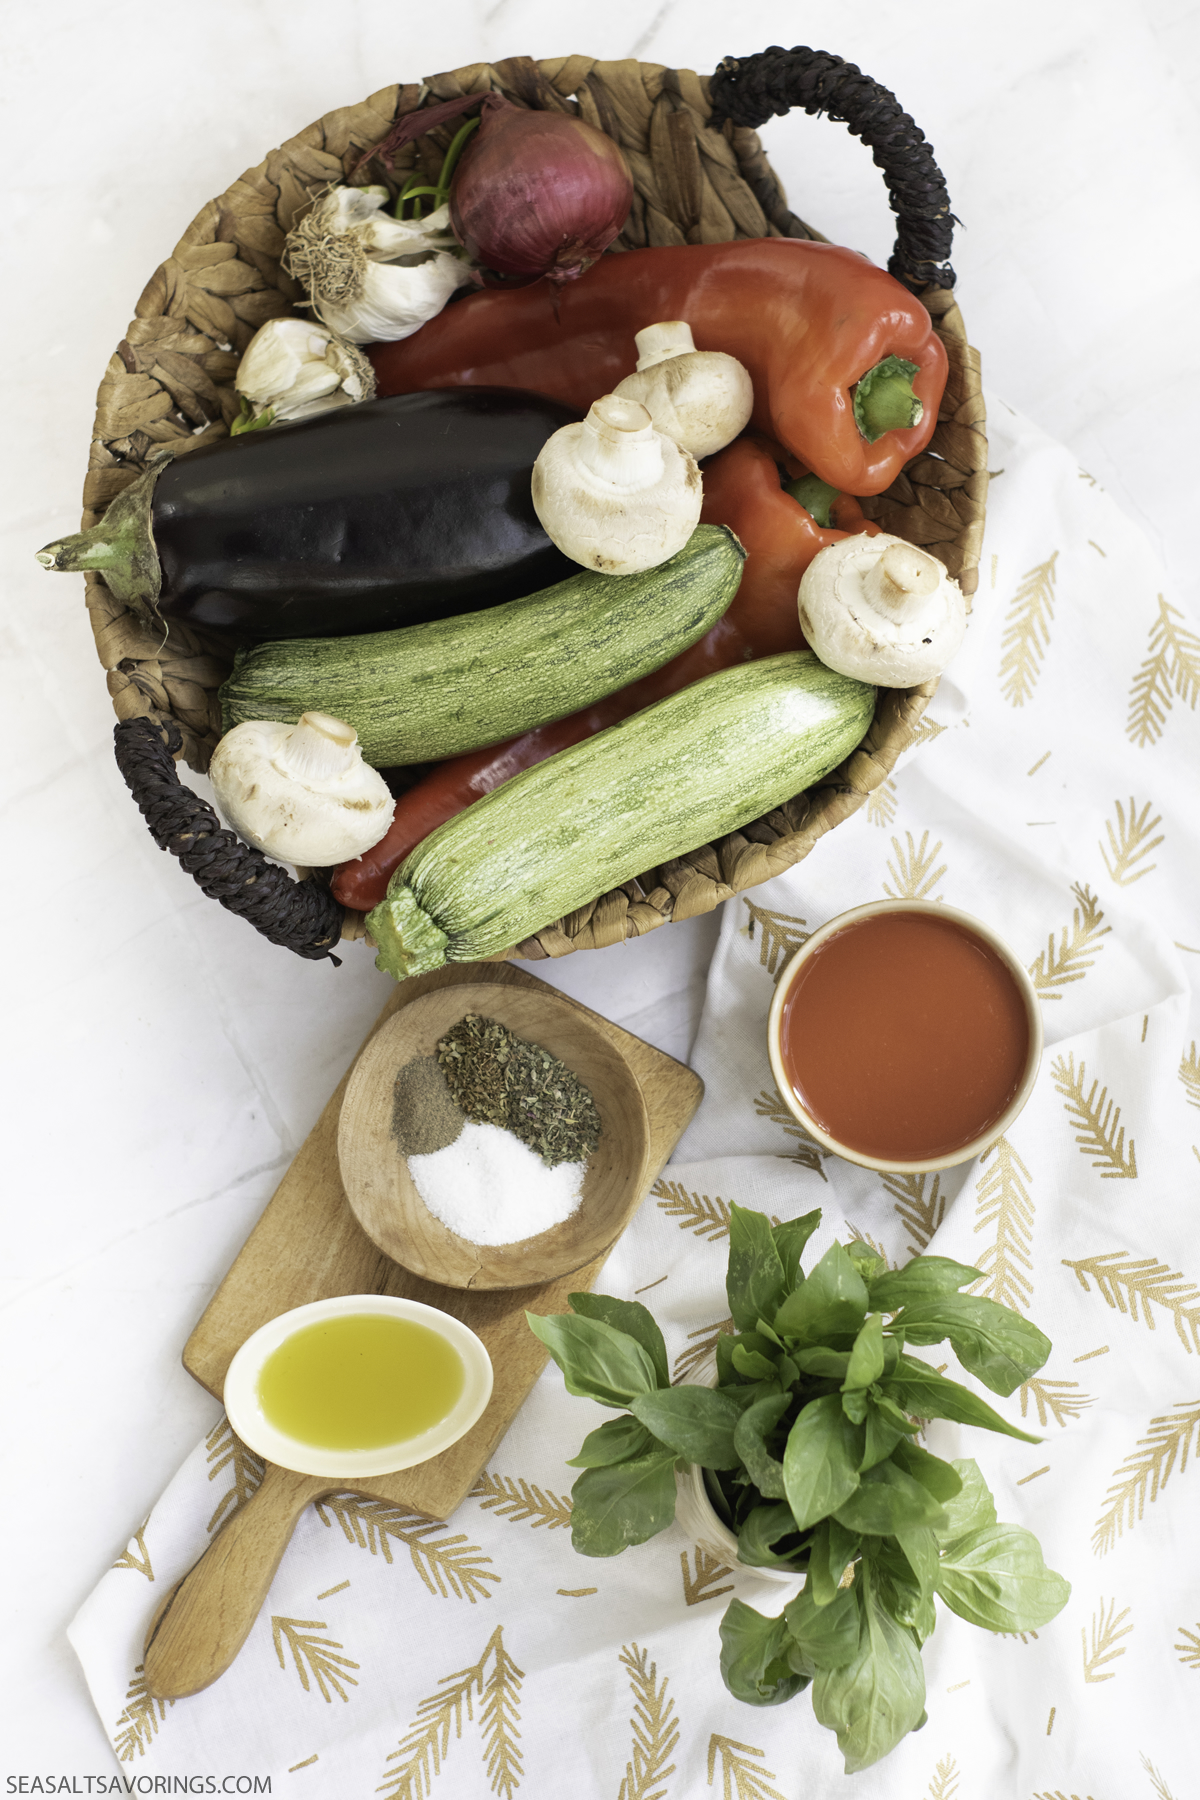 basket of vegetables and small bowls of spices on a table